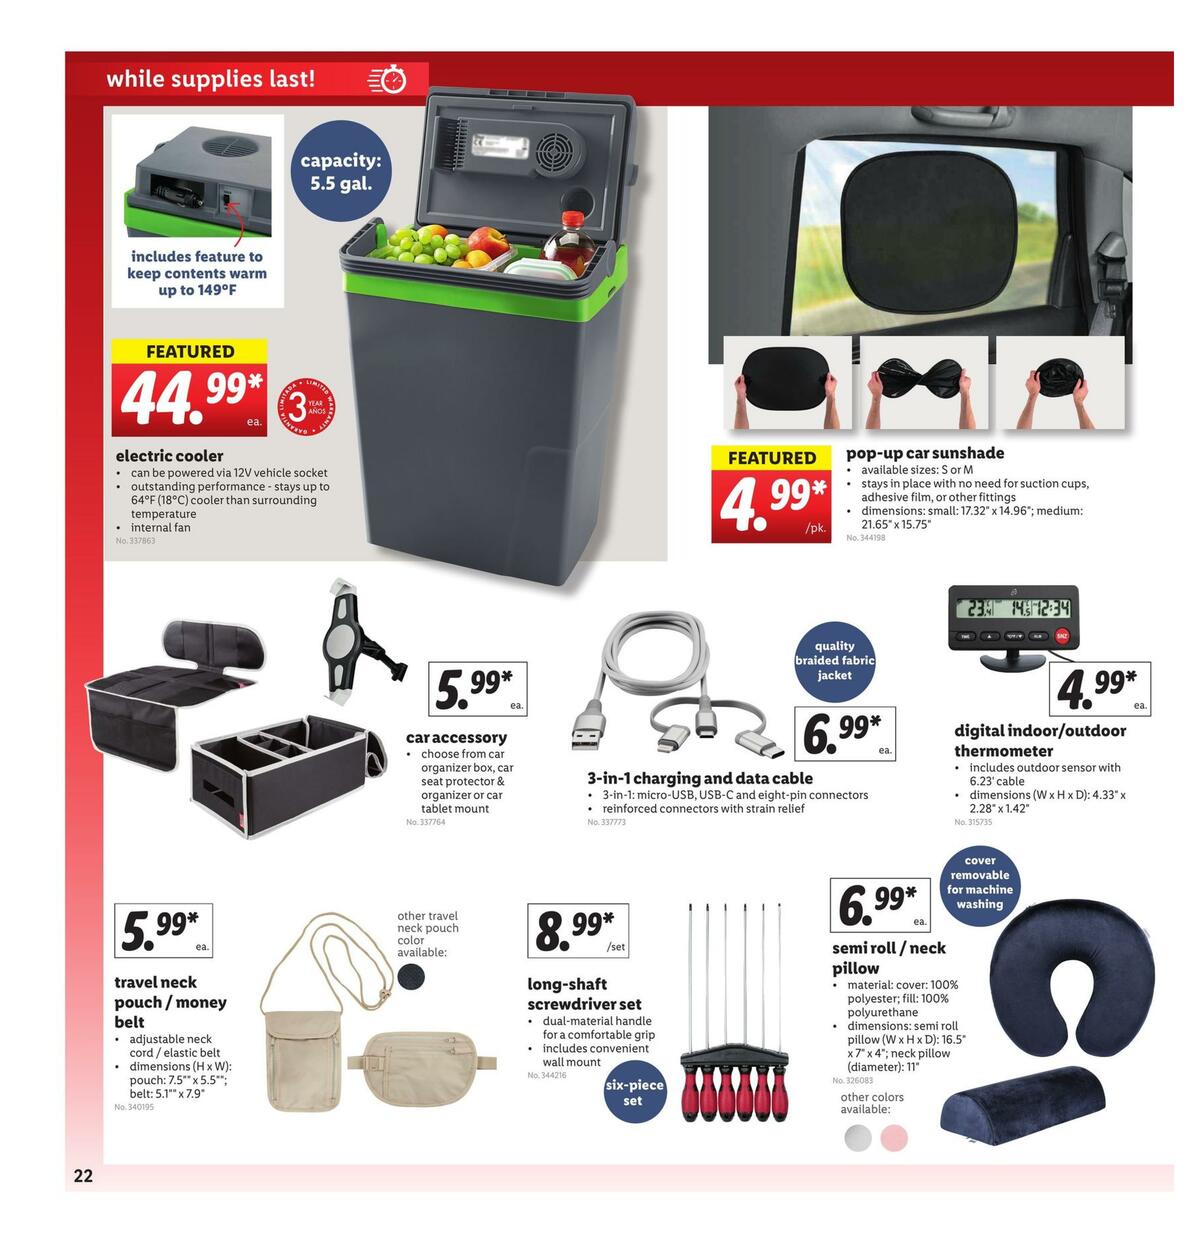 LIDL Weekly Ad from July 15